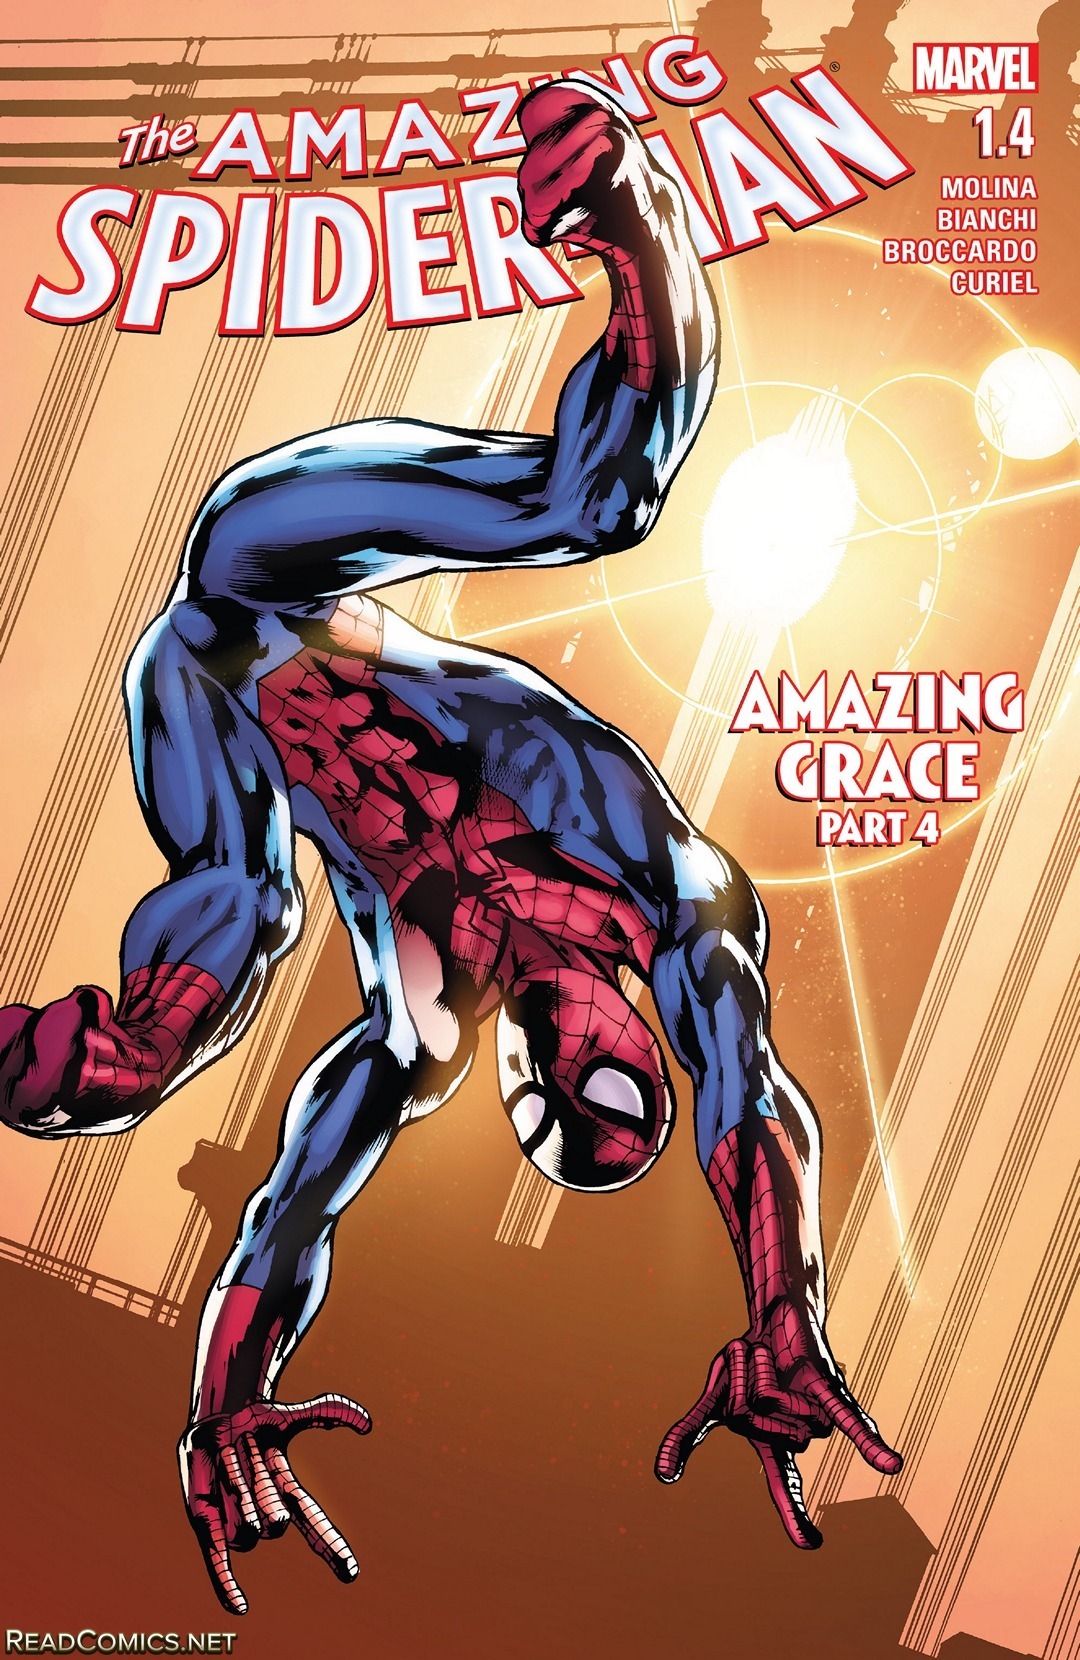 The Amazing Spider-Man (2015-): Chapter 1-4 - Page 1